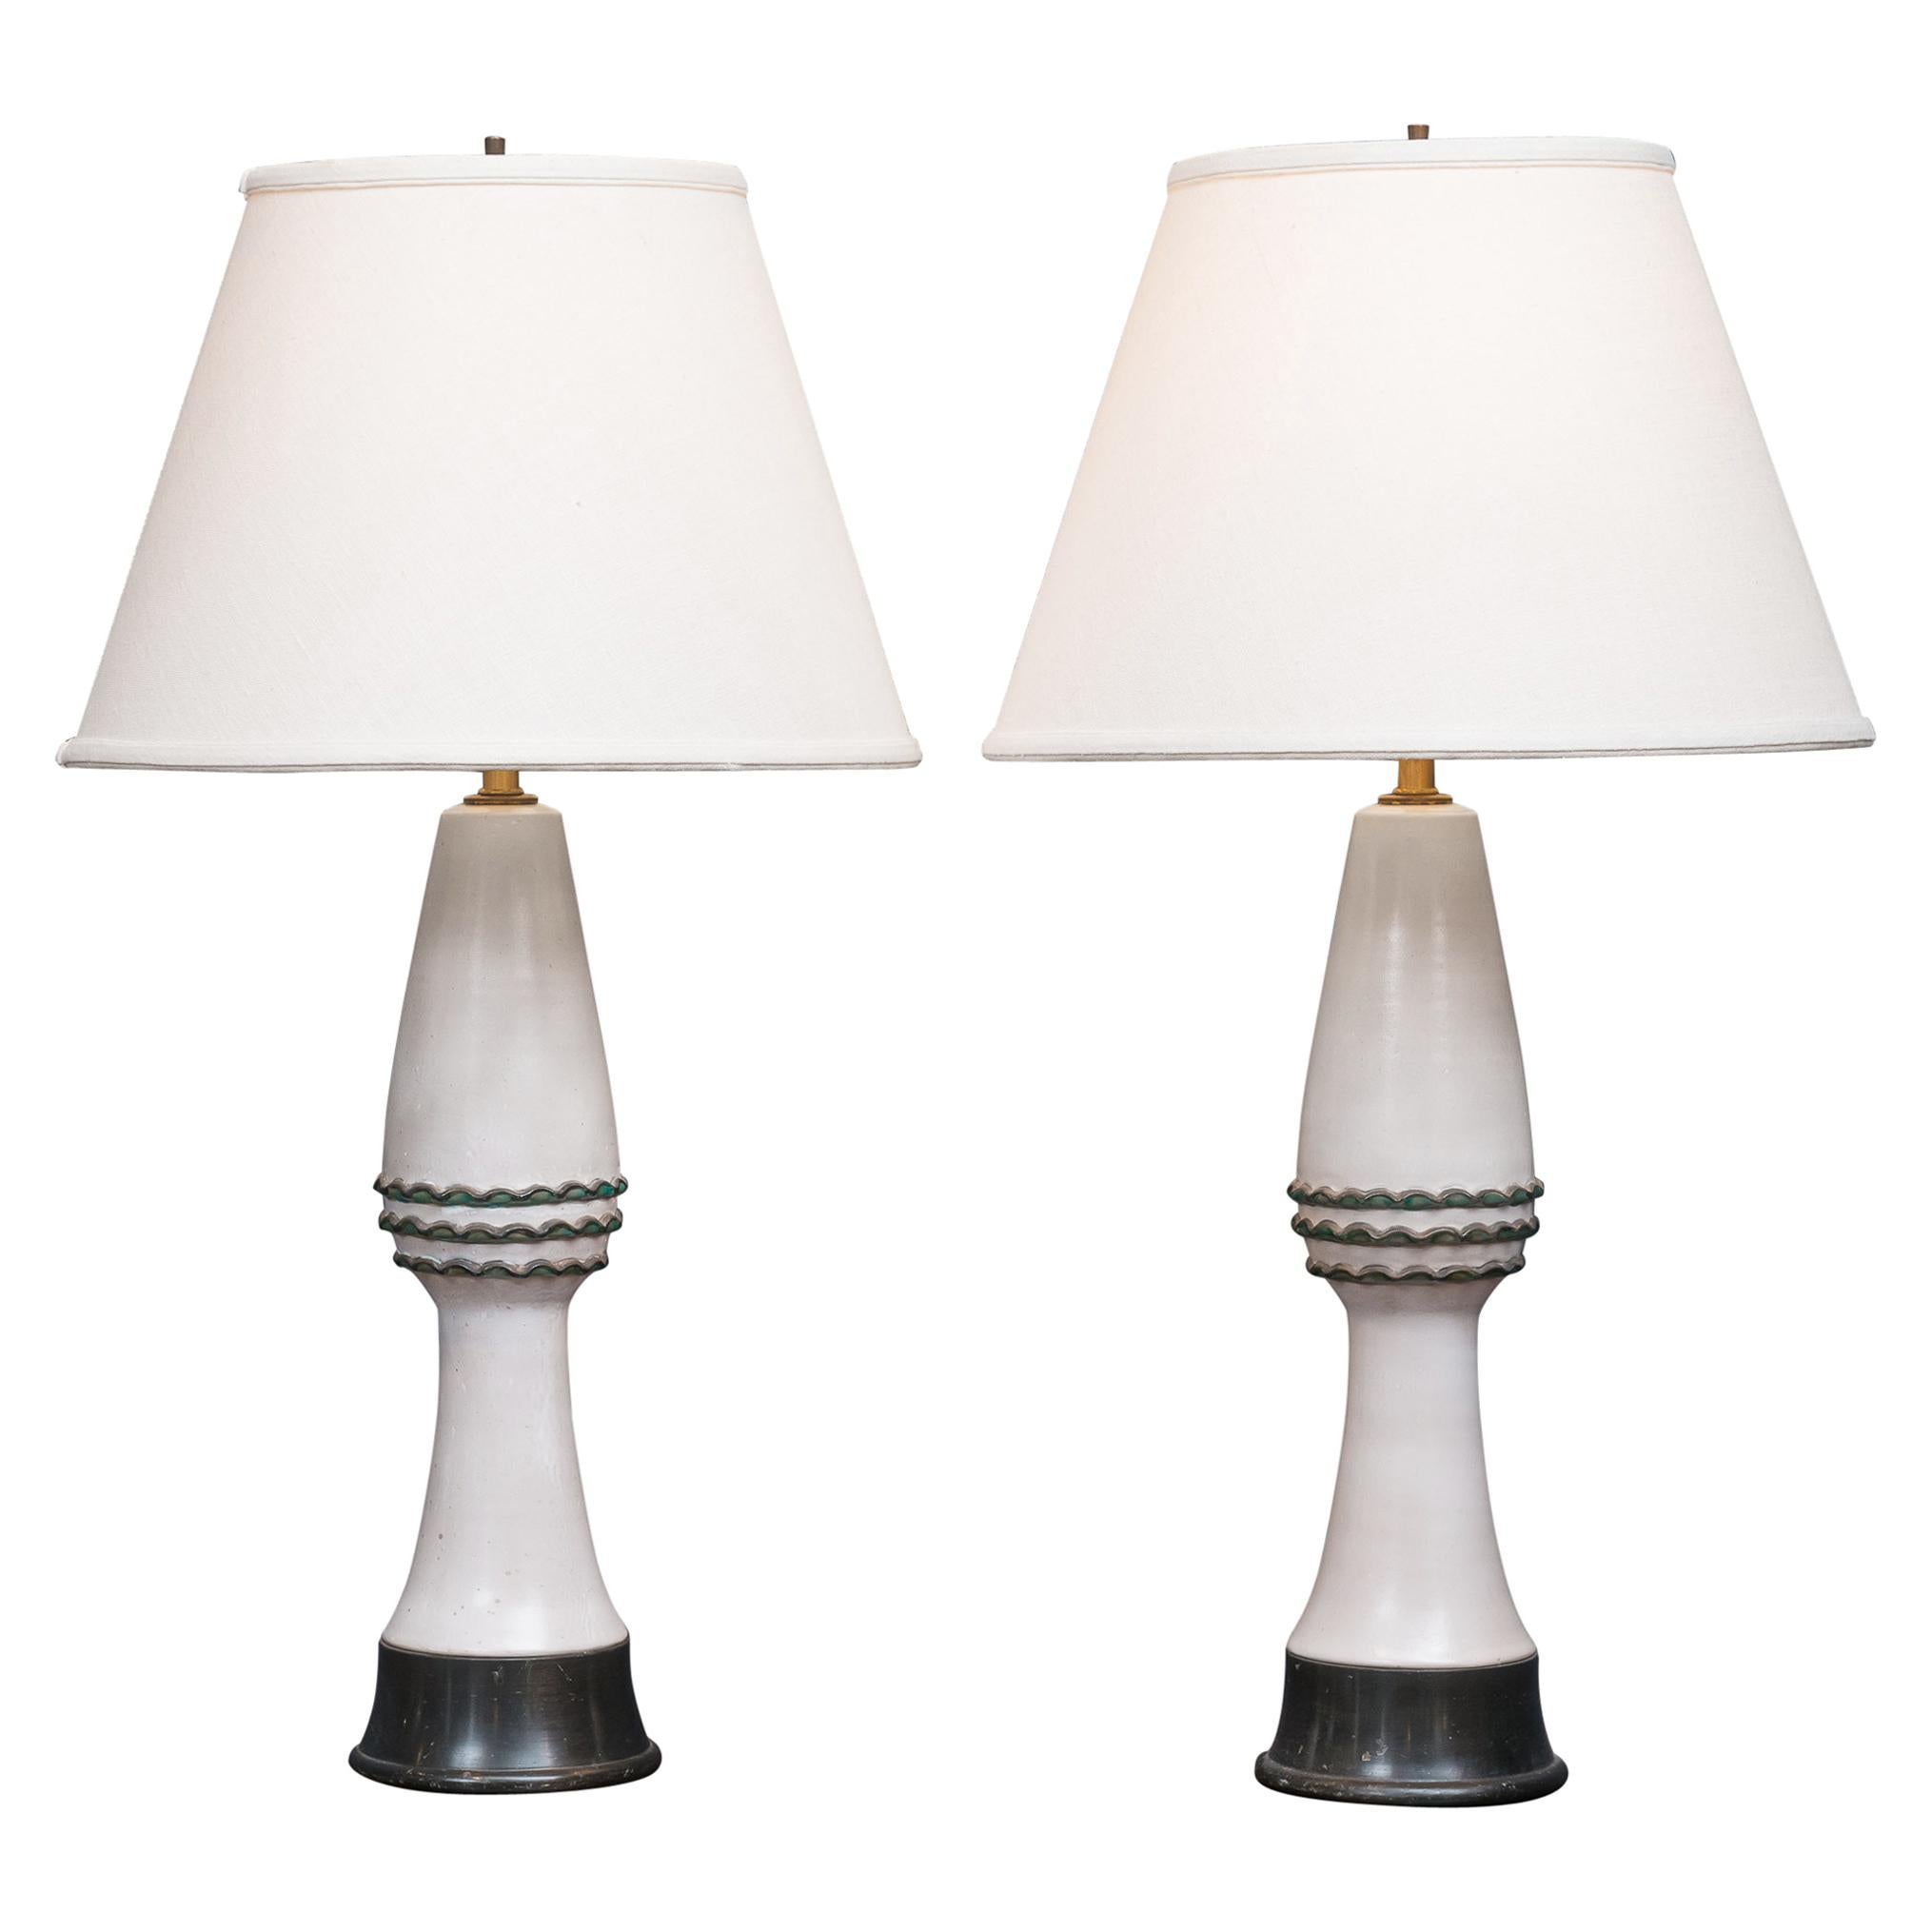 Pair of Midcentury Table Lamps by Wilshire House